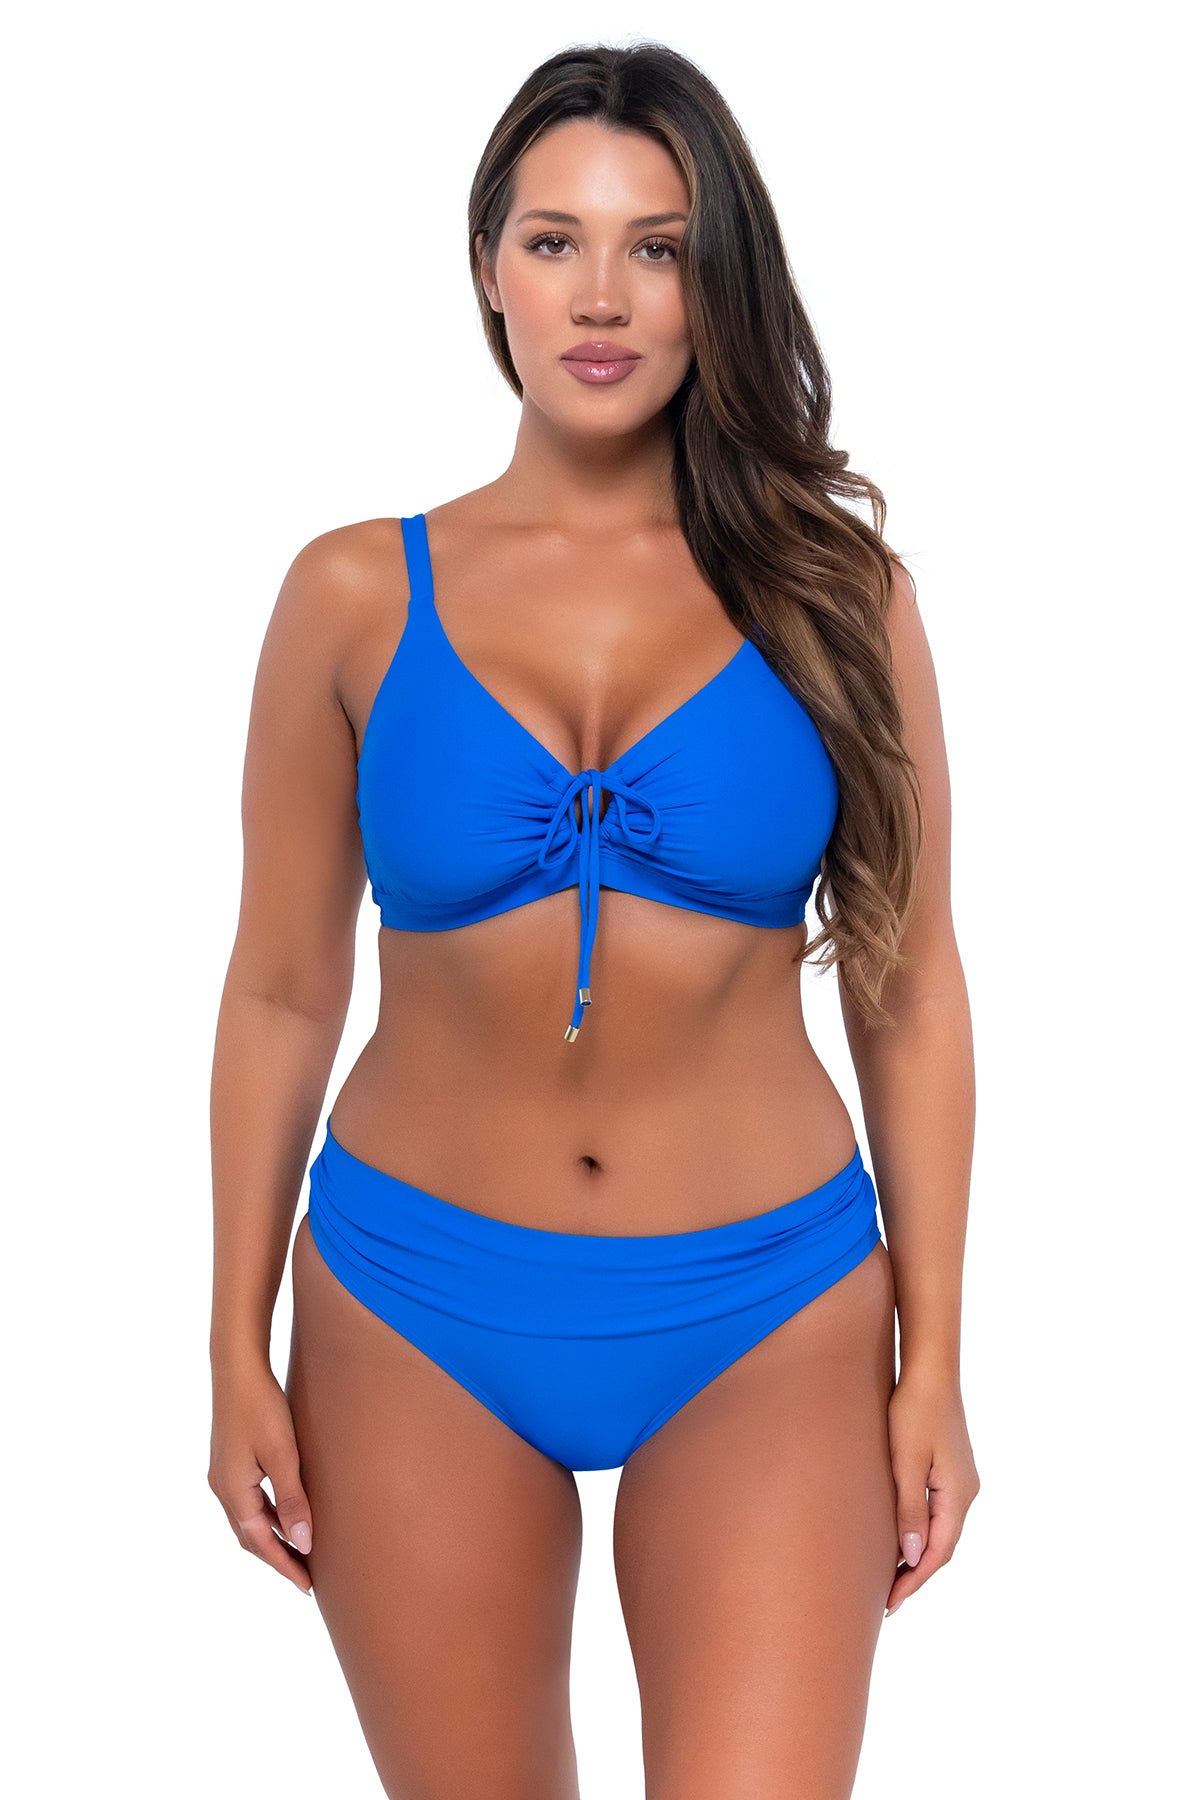 Front pose #1 of Nicky wearing Sunsets Electric Blue Unforgettable Bottom with matching Kauai Keyhole bikini top